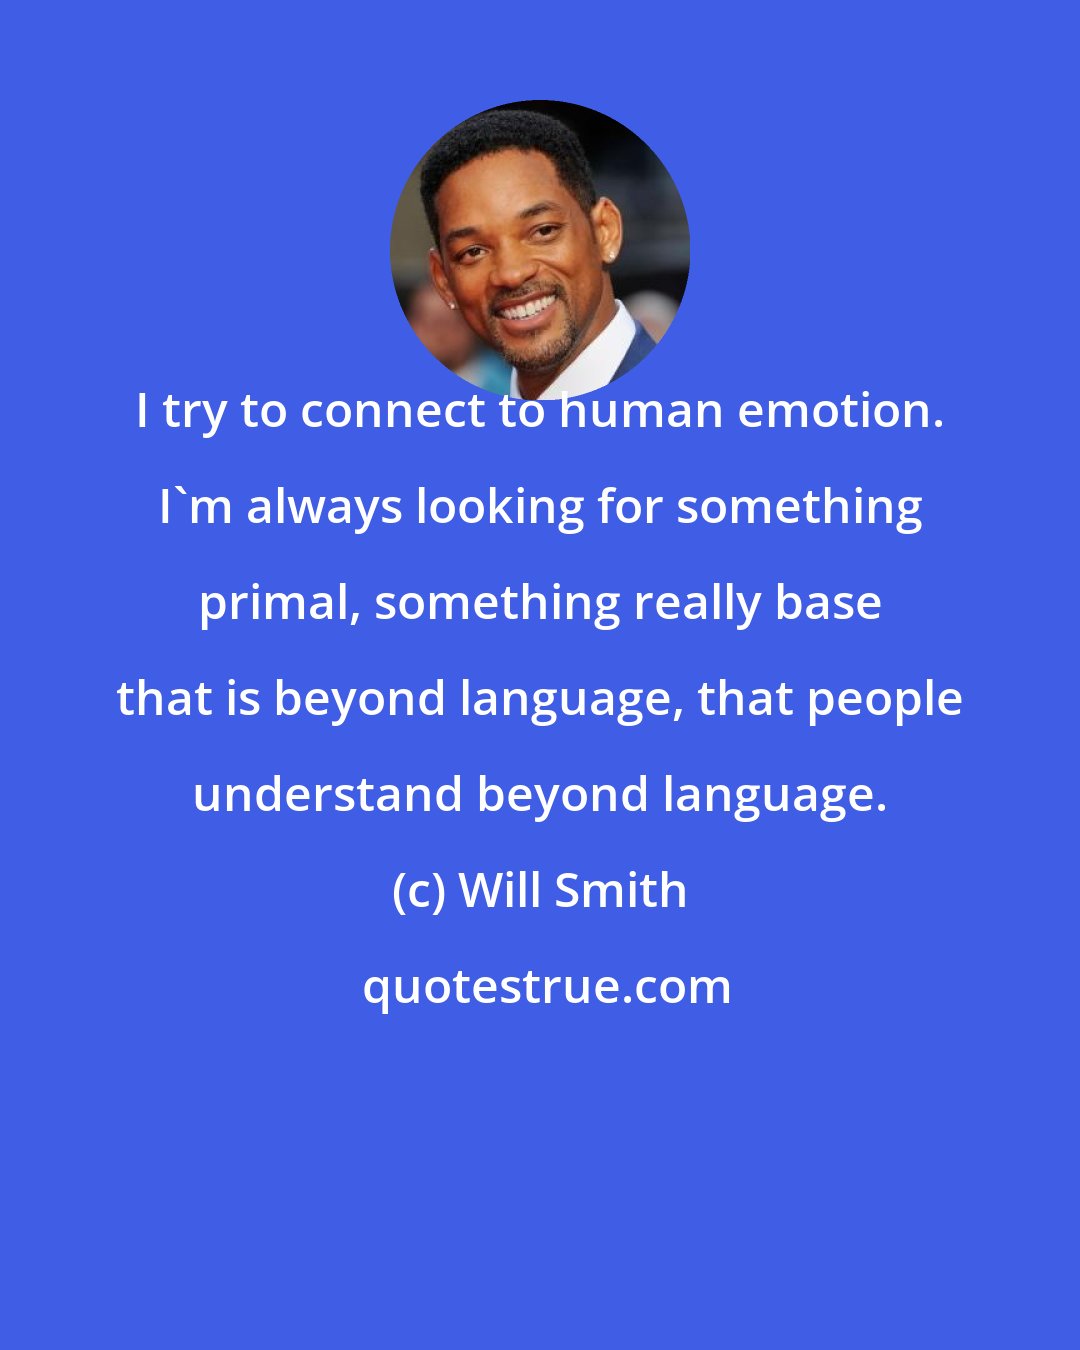 Will Smith: I try to connect to human emotion. I'm always looking for something primal, something really base that is beyond language, that people understand beyond language.